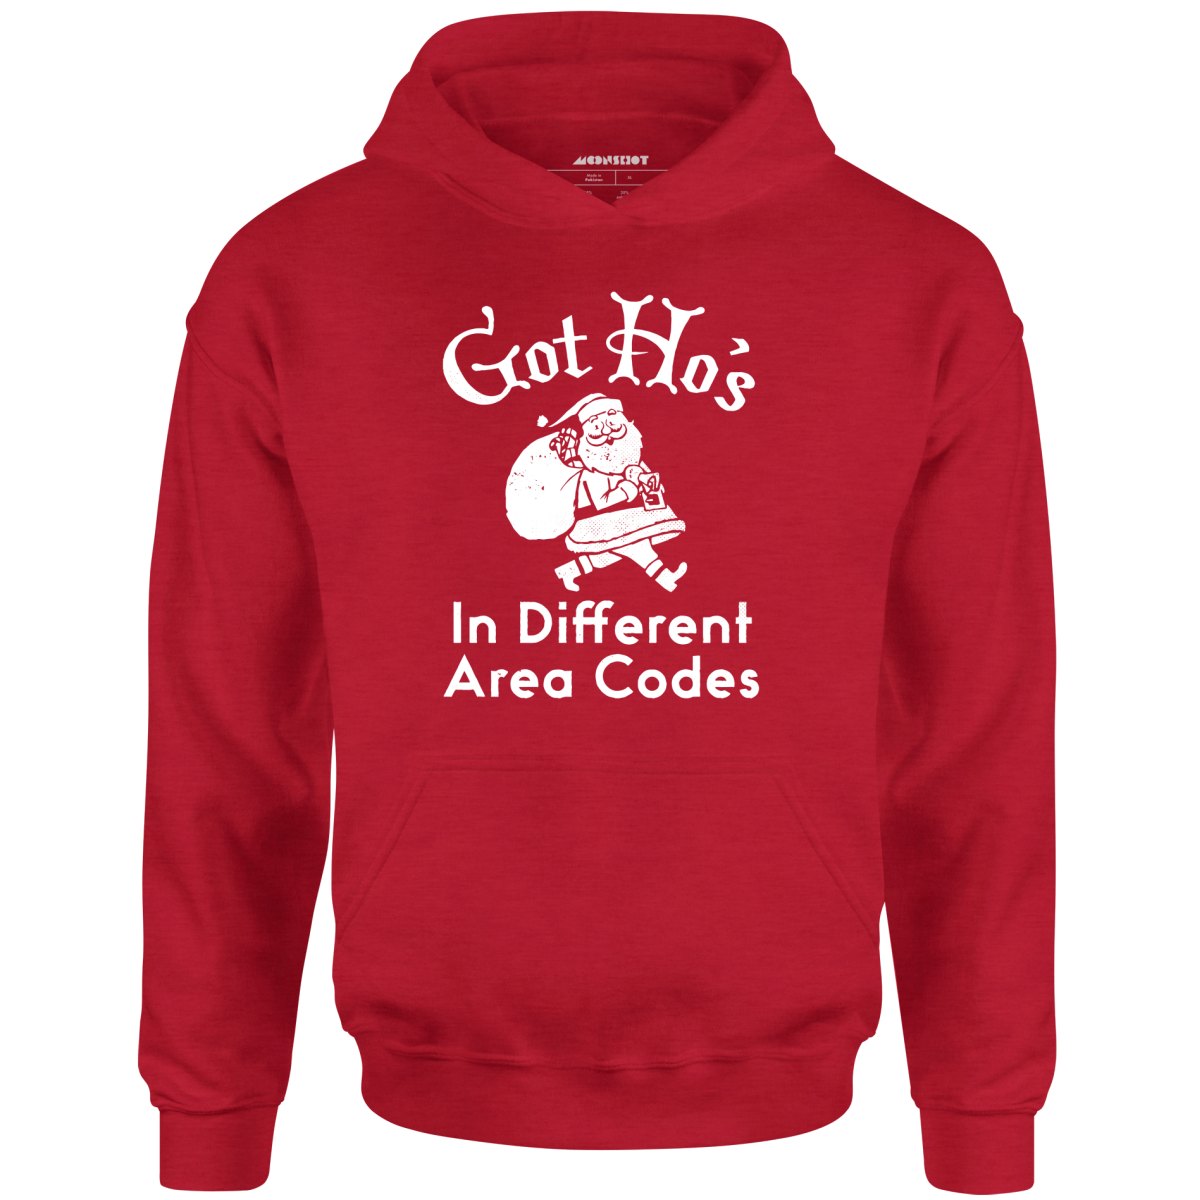 Got Ho's in Different Area Codes - Unisex Hoodie